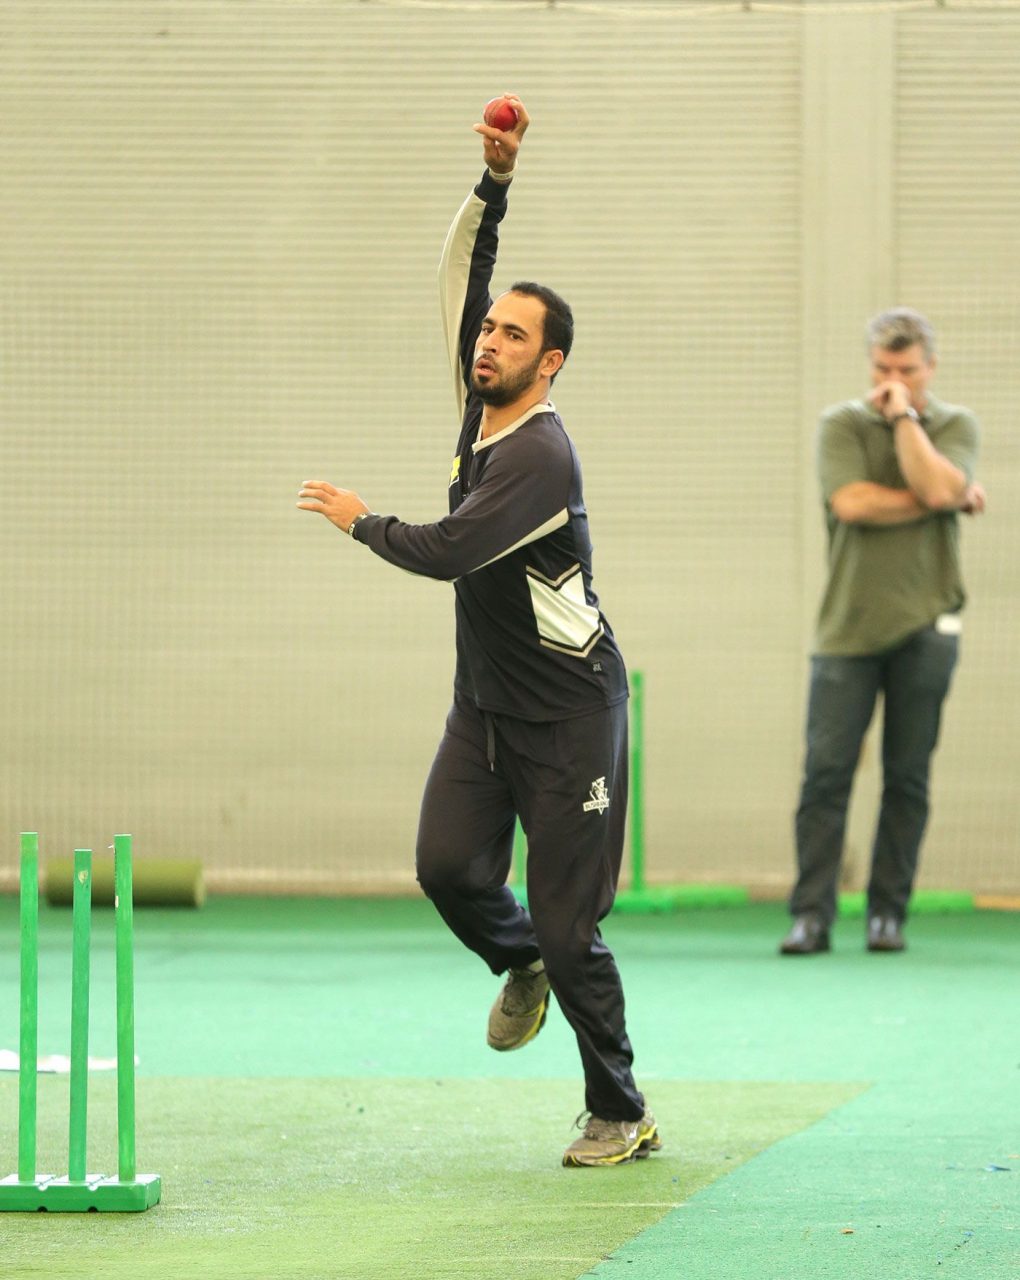 Fawad Ahmed Bowling Practice